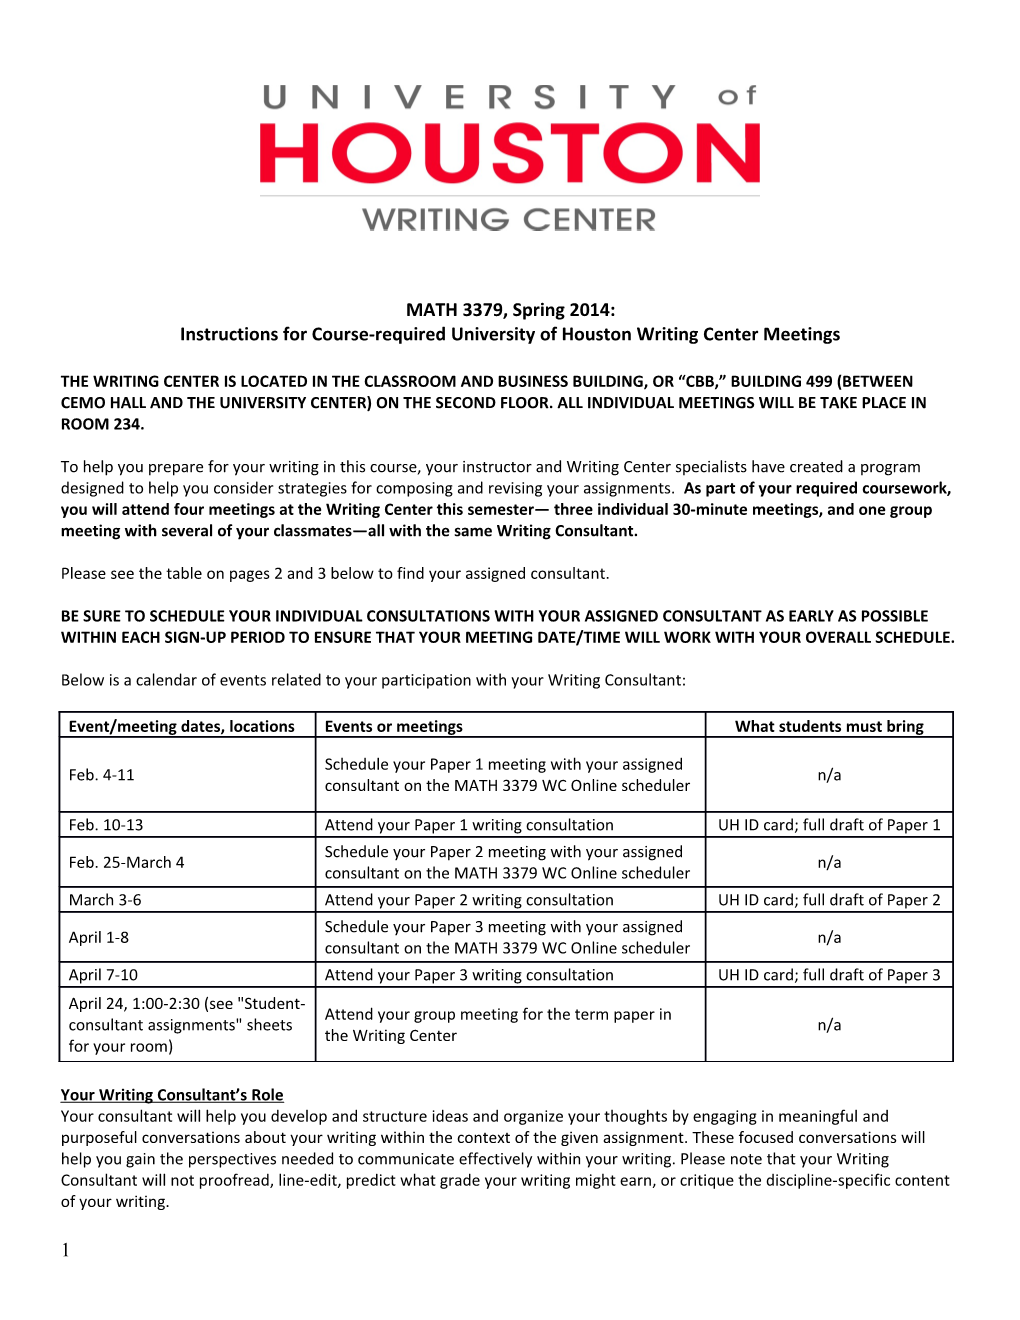 Instructions for Course-Required University of Houston Writing Center Meetings